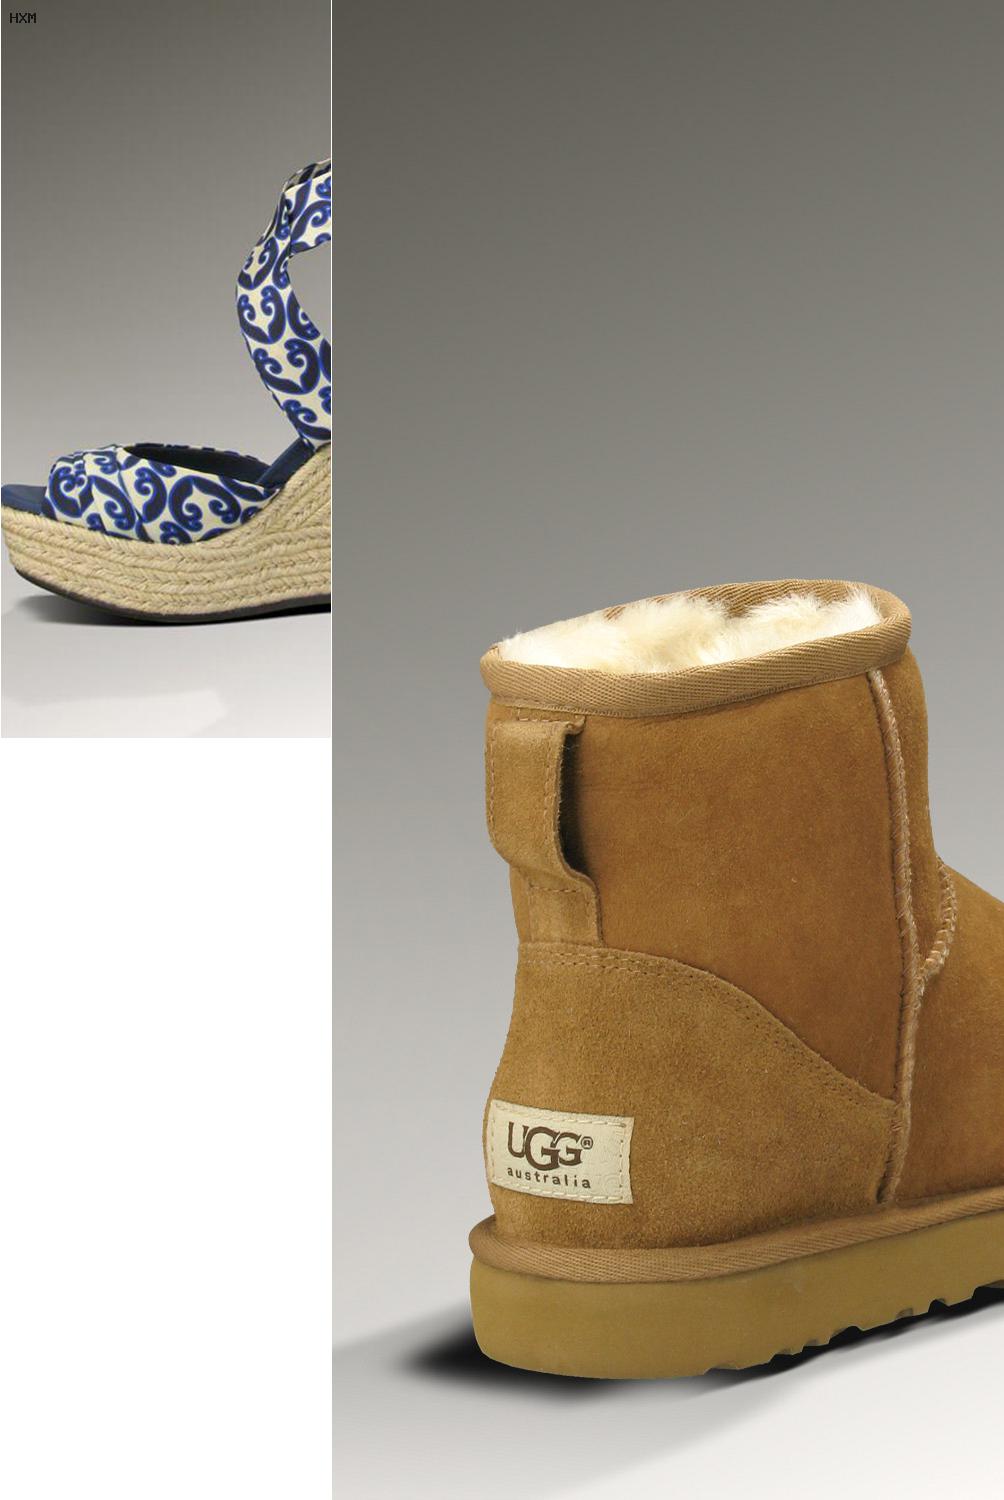 uggs made in china